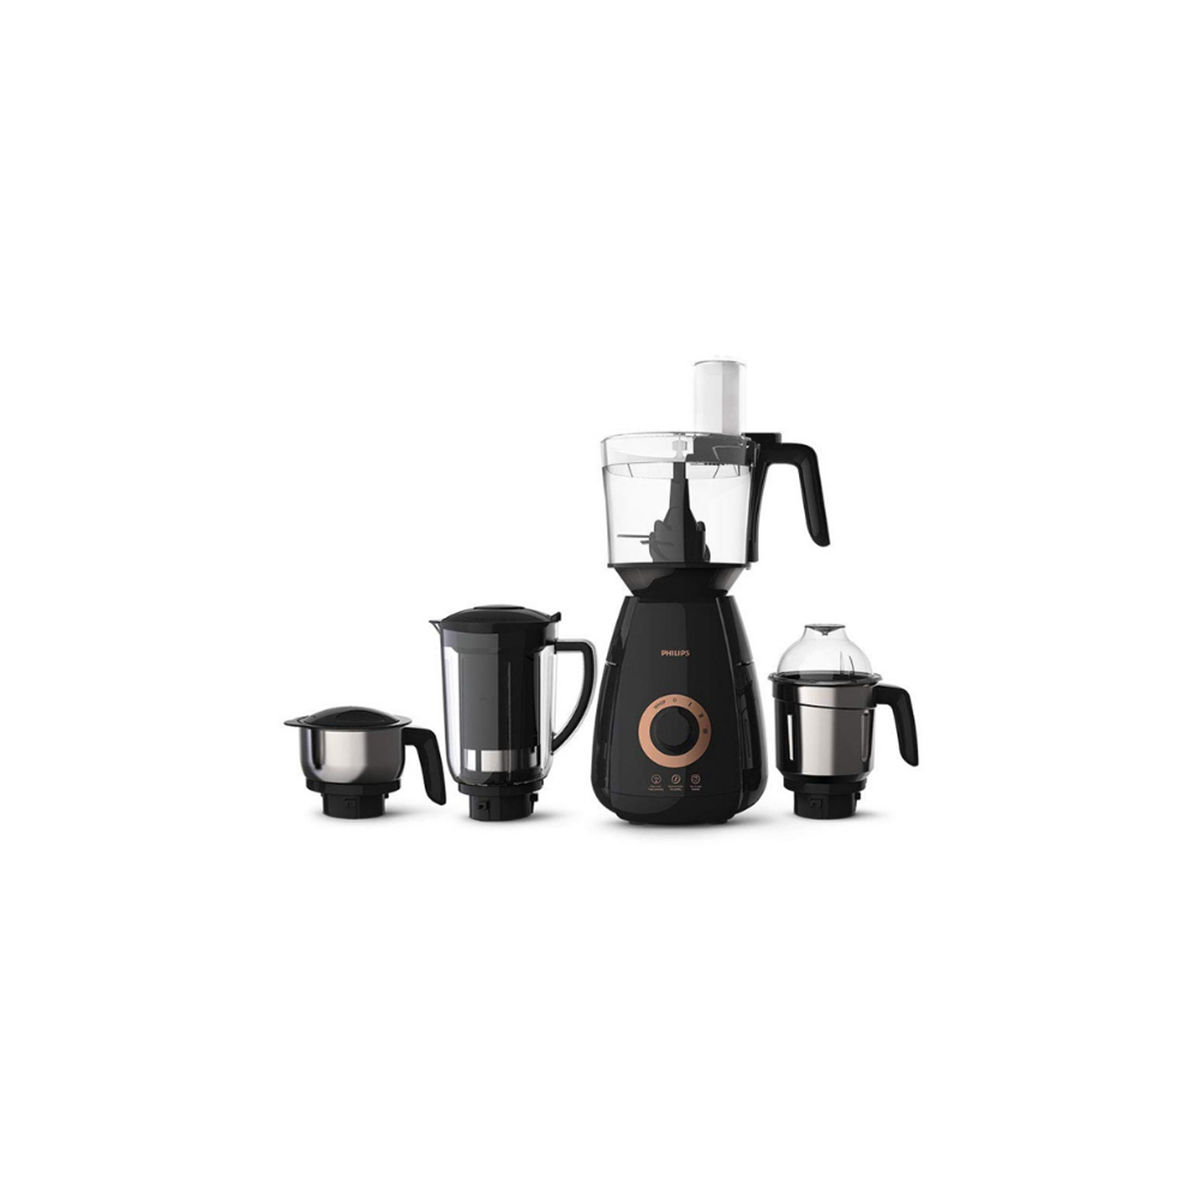 Philips Hl7707/00 750W Mixer Grinder With 4 Jars, Black: Buy Philips Hl7707/00 750W Mixer Grinder 4 Jars, Black at Best Price in India | Nykaa